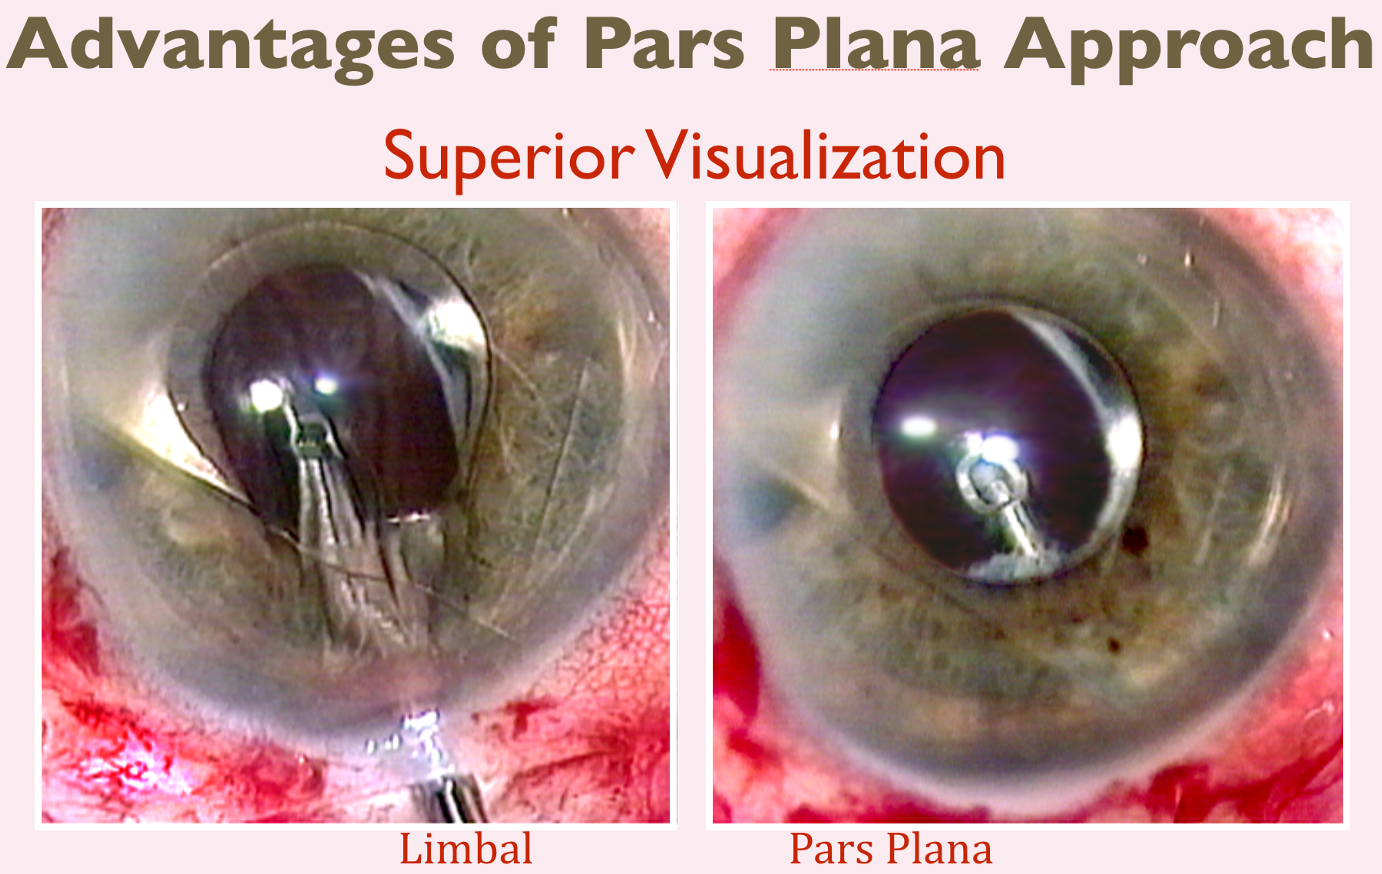 Figure 2. A vitrector placed through the limbus distorts the view, whereas a pars plana entry maintains excellent corneal optics.